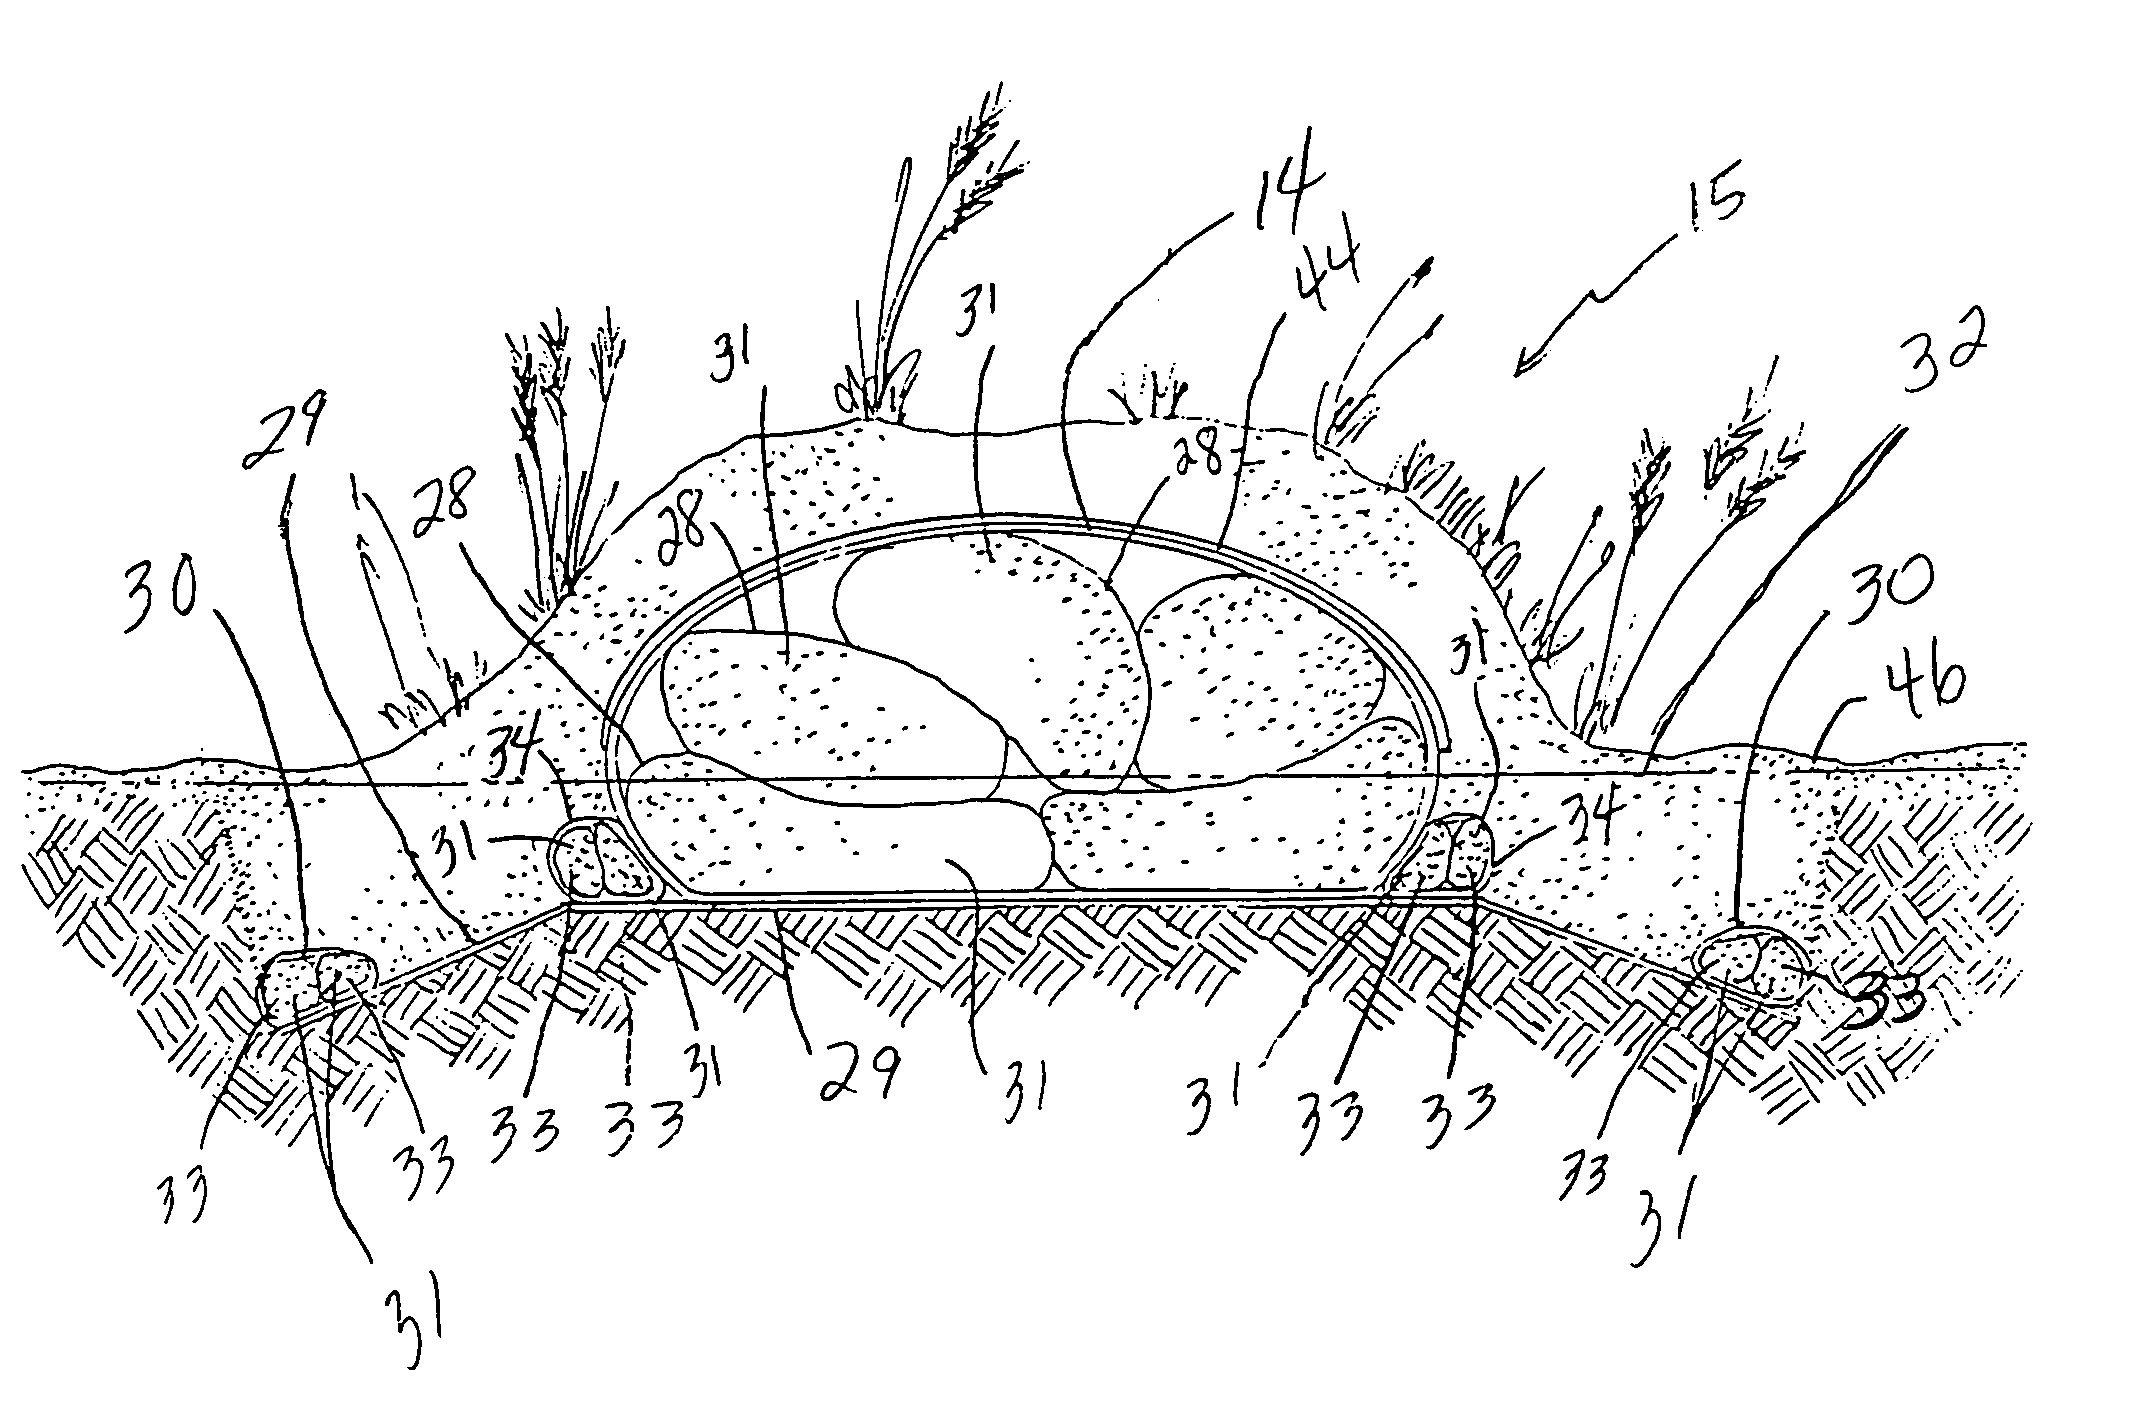 Apparatus and method for deploying geotextile tubes